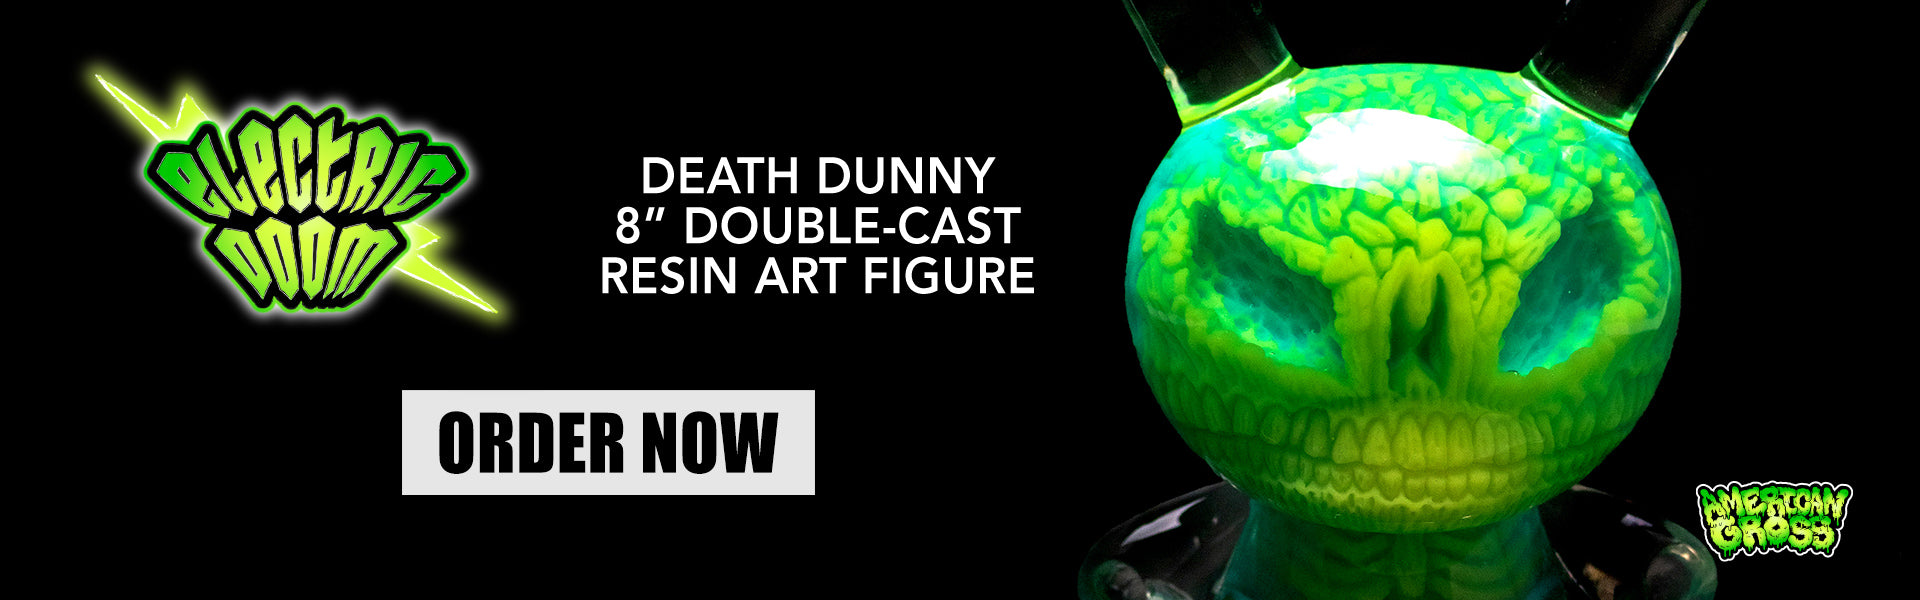 Death Dunny 8" Art Figure by American Gross - Only at Kidrobot.com